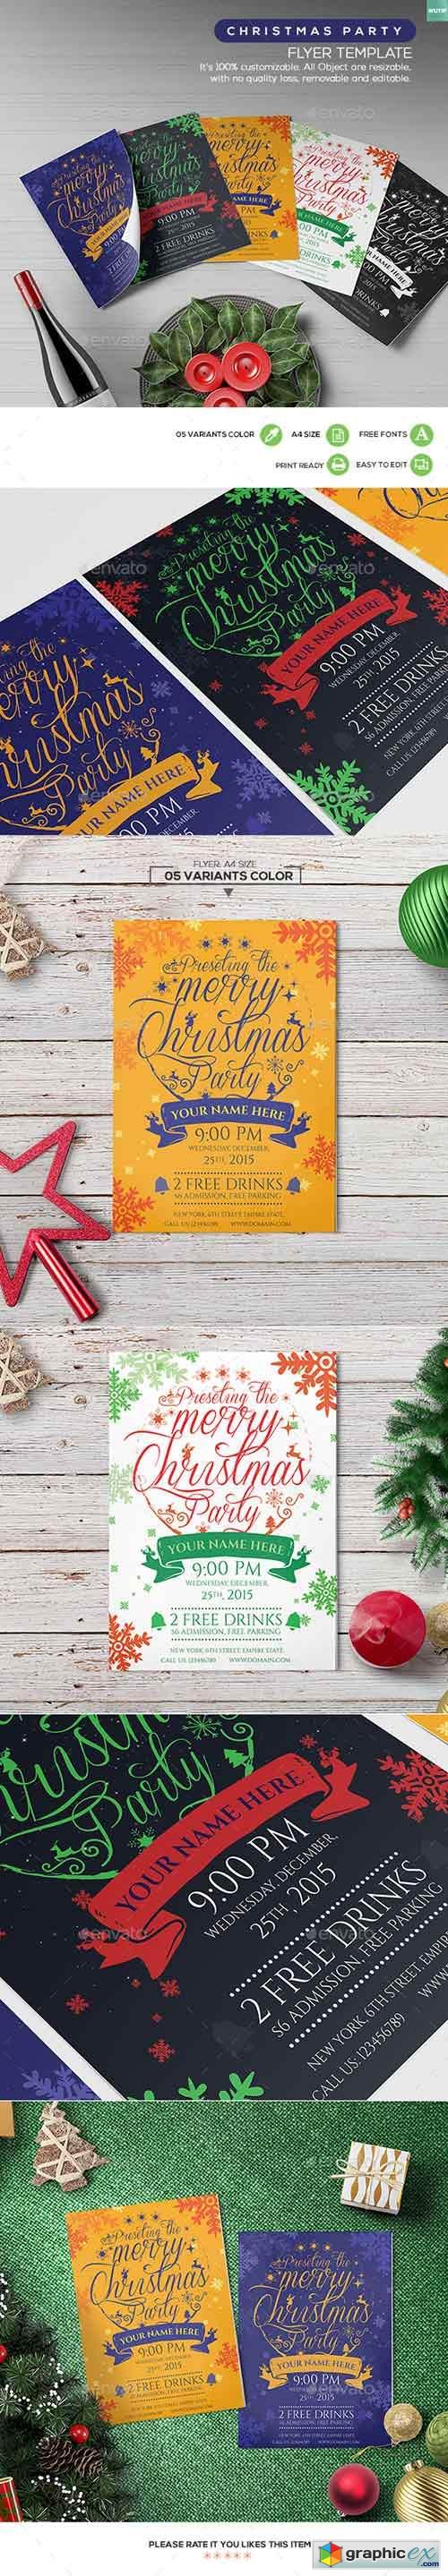 Christmas Party - Flyer Template 03